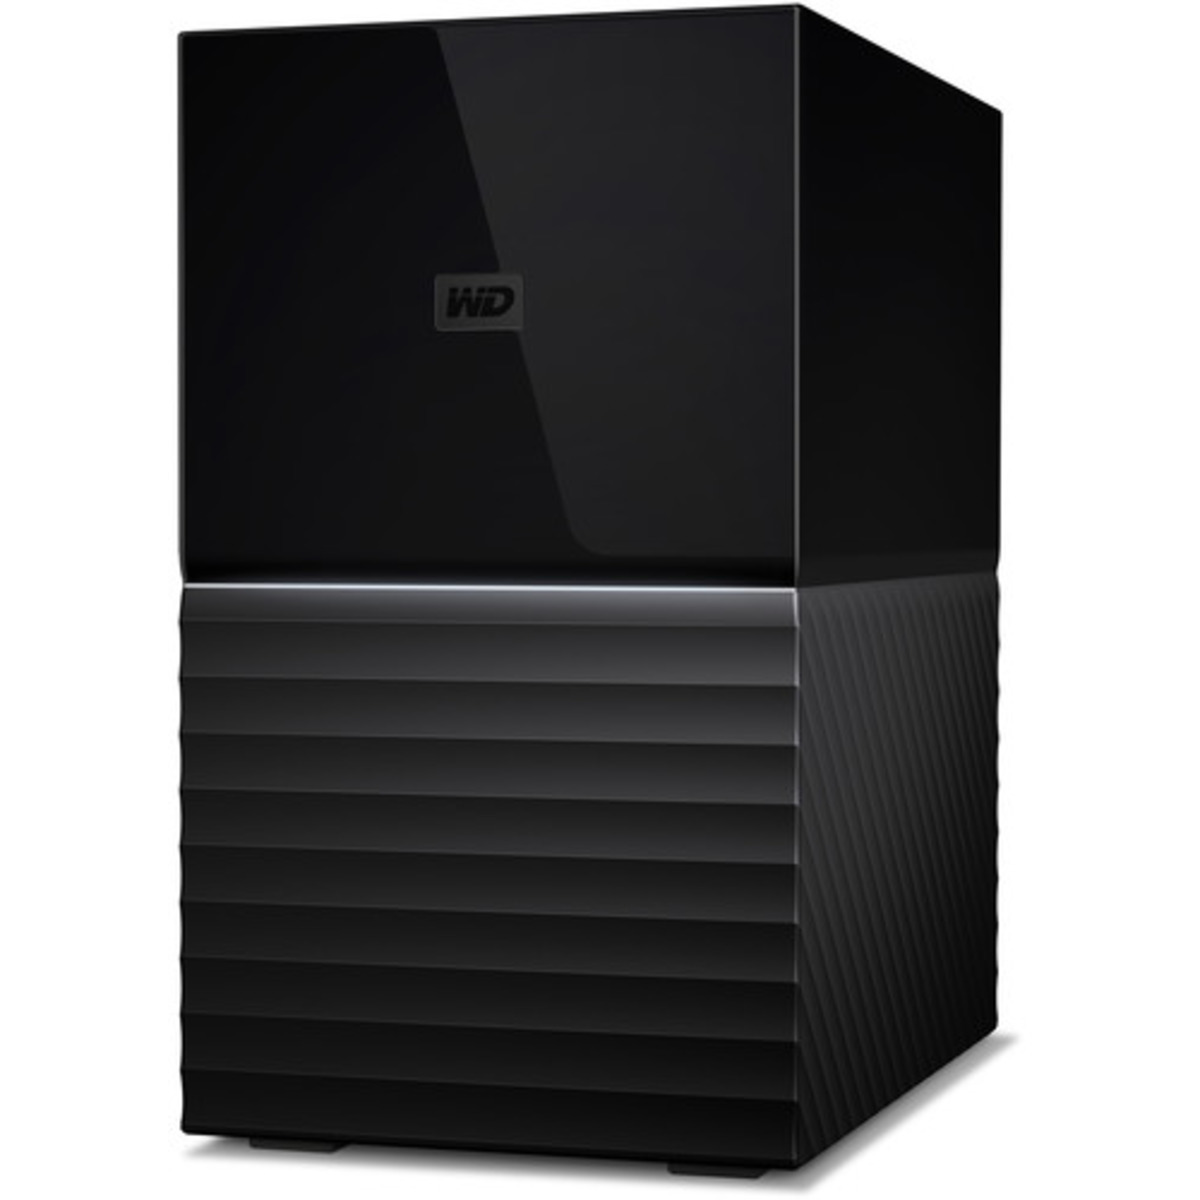 Western Digital My Book DUO Gen 2 6tb 2-Bay Desktop Personal / Basic Home / Small Office DAS - Direct Attached Storage Device 1x6tb Western Digital Red Plus WD60EFPX 3.5 5640rpm SATA 6Gb/s HDD NAS Class Drives Installed - Burn-In Tested - ON SALE My Book DUO Gen 2